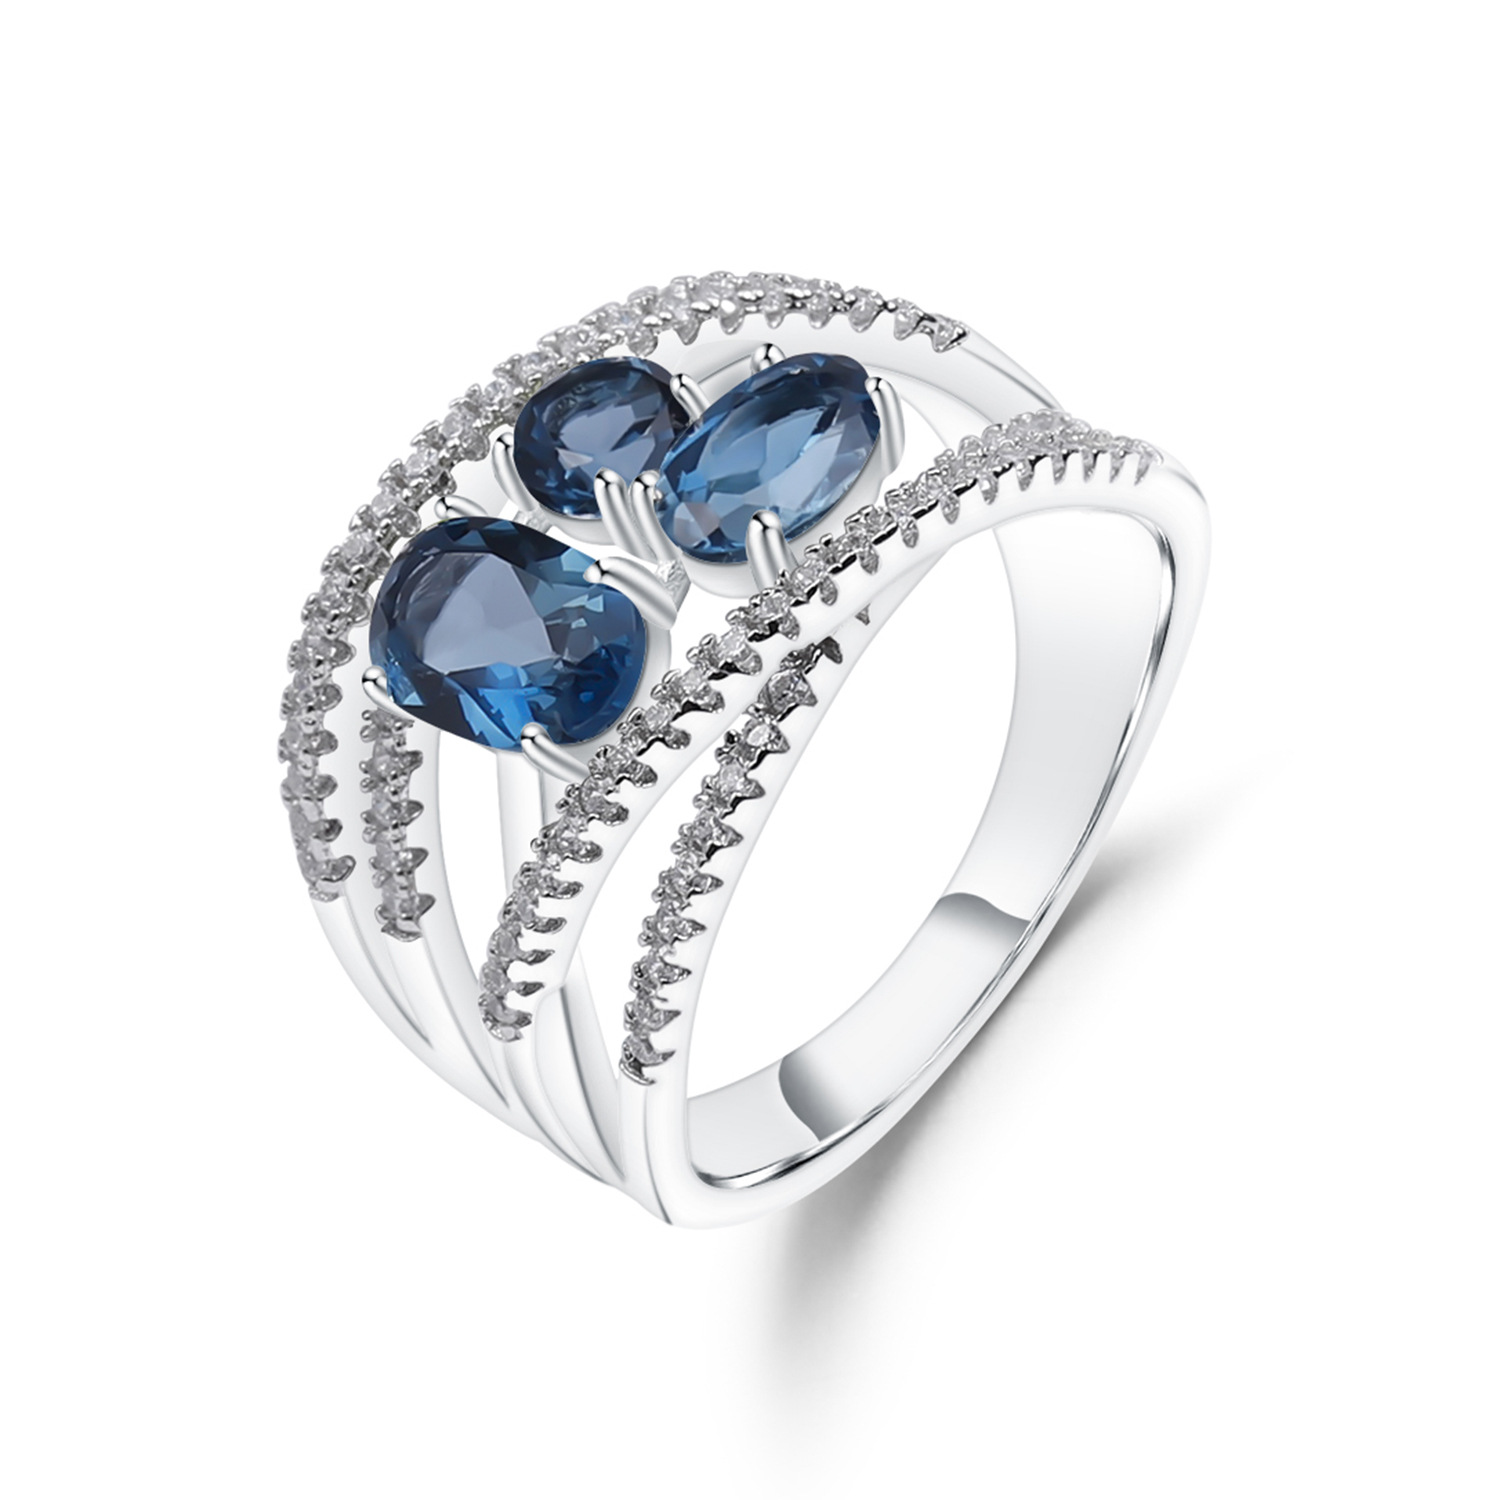 Sister's Jewelry gift A unique jewelry gift for your daughter Cocktail ring A celebration of beauty and grace Jewelry that tells a story of elegance and sophistication